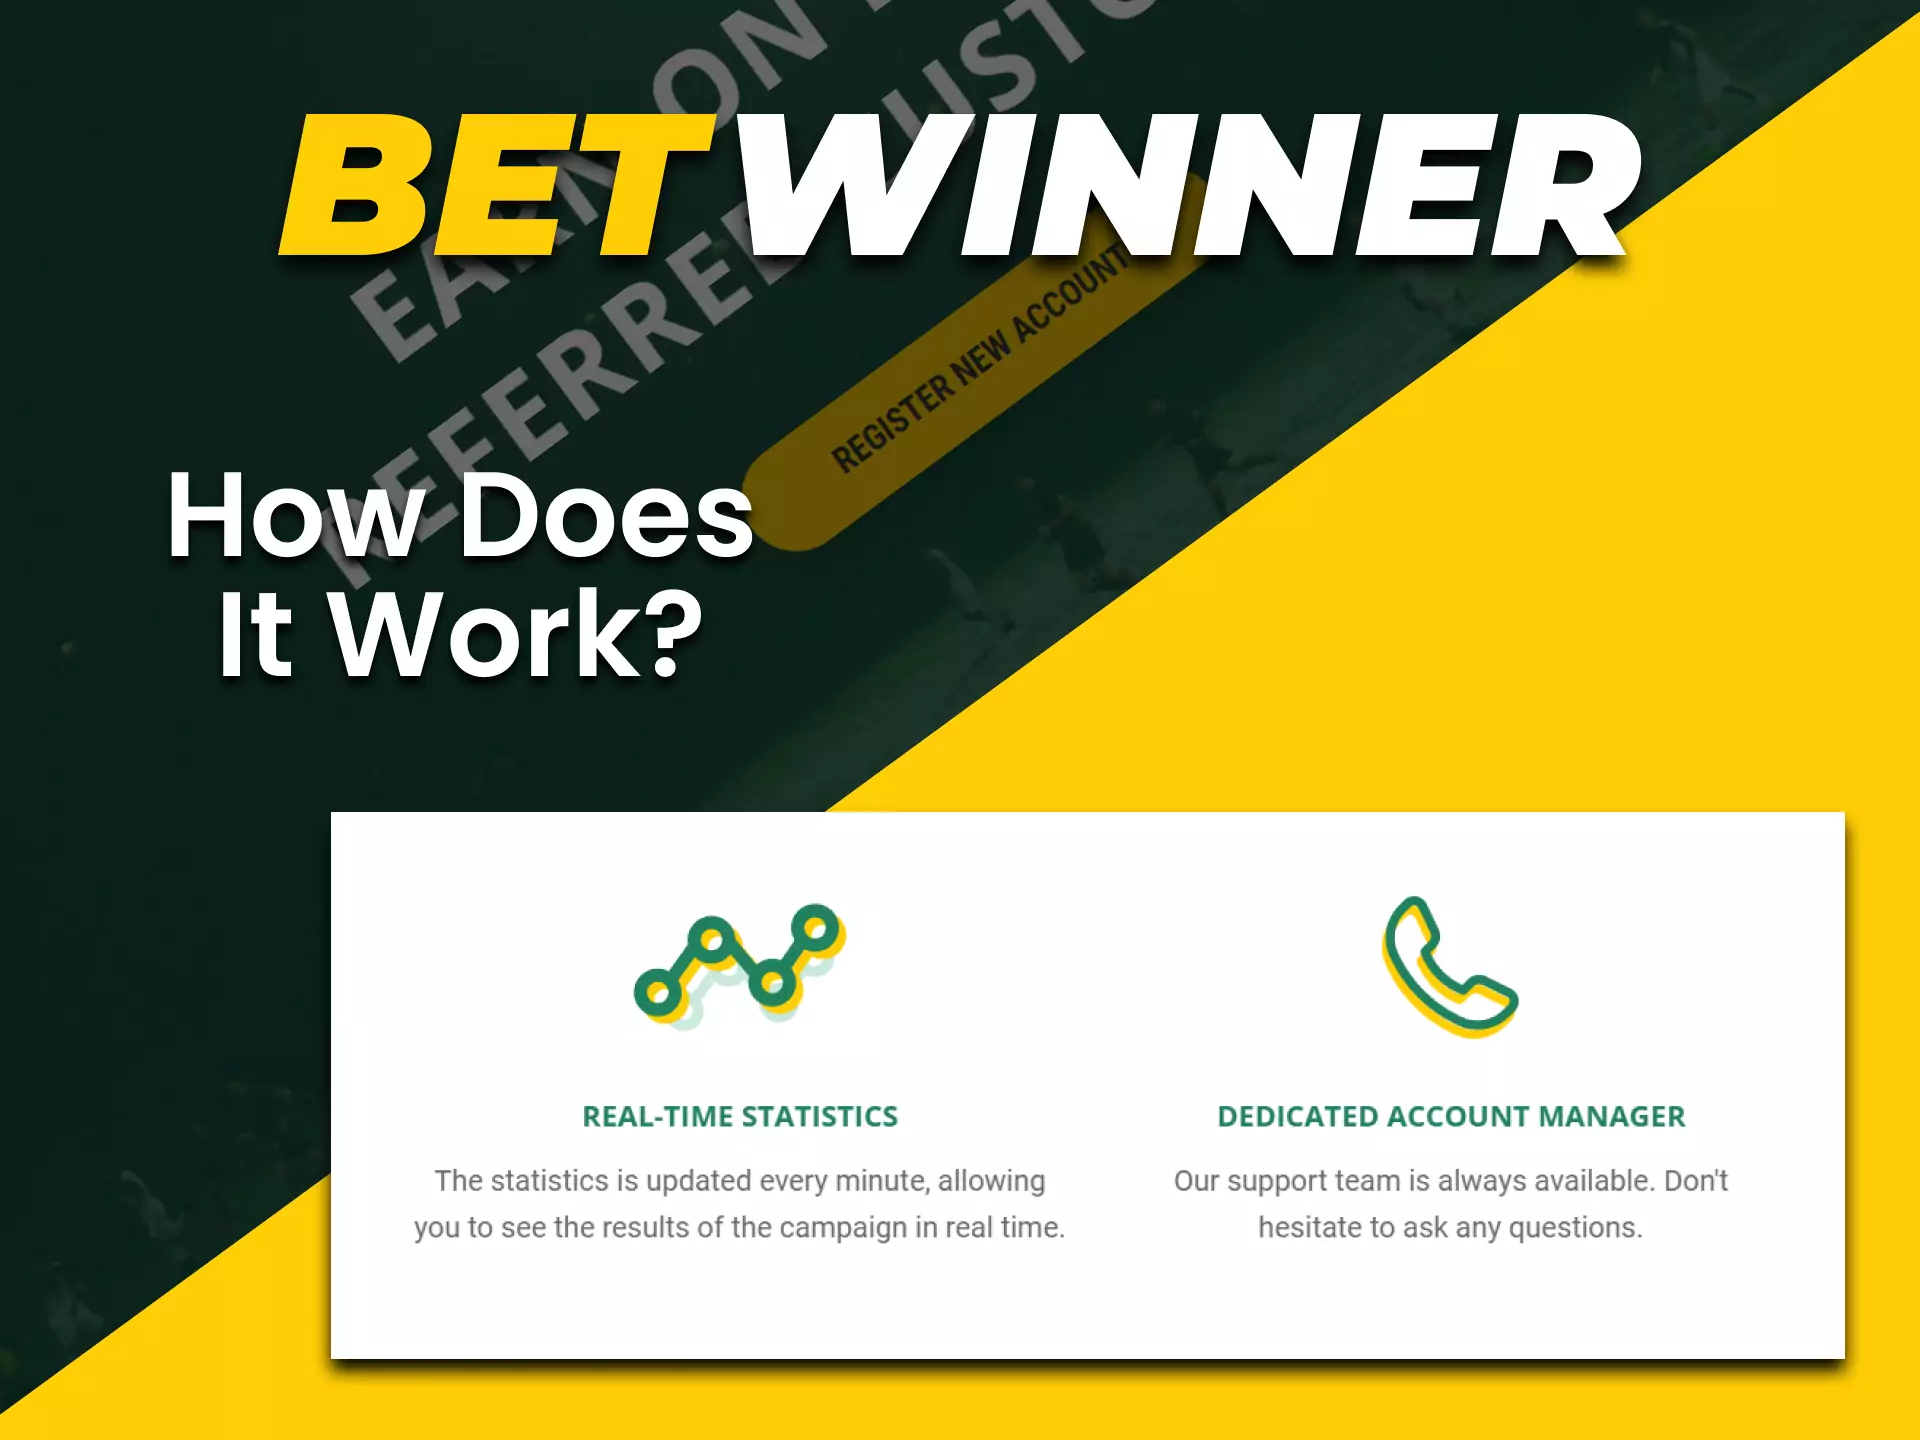 The affiliate program by Betwinner allows members to get money from inviting new users.